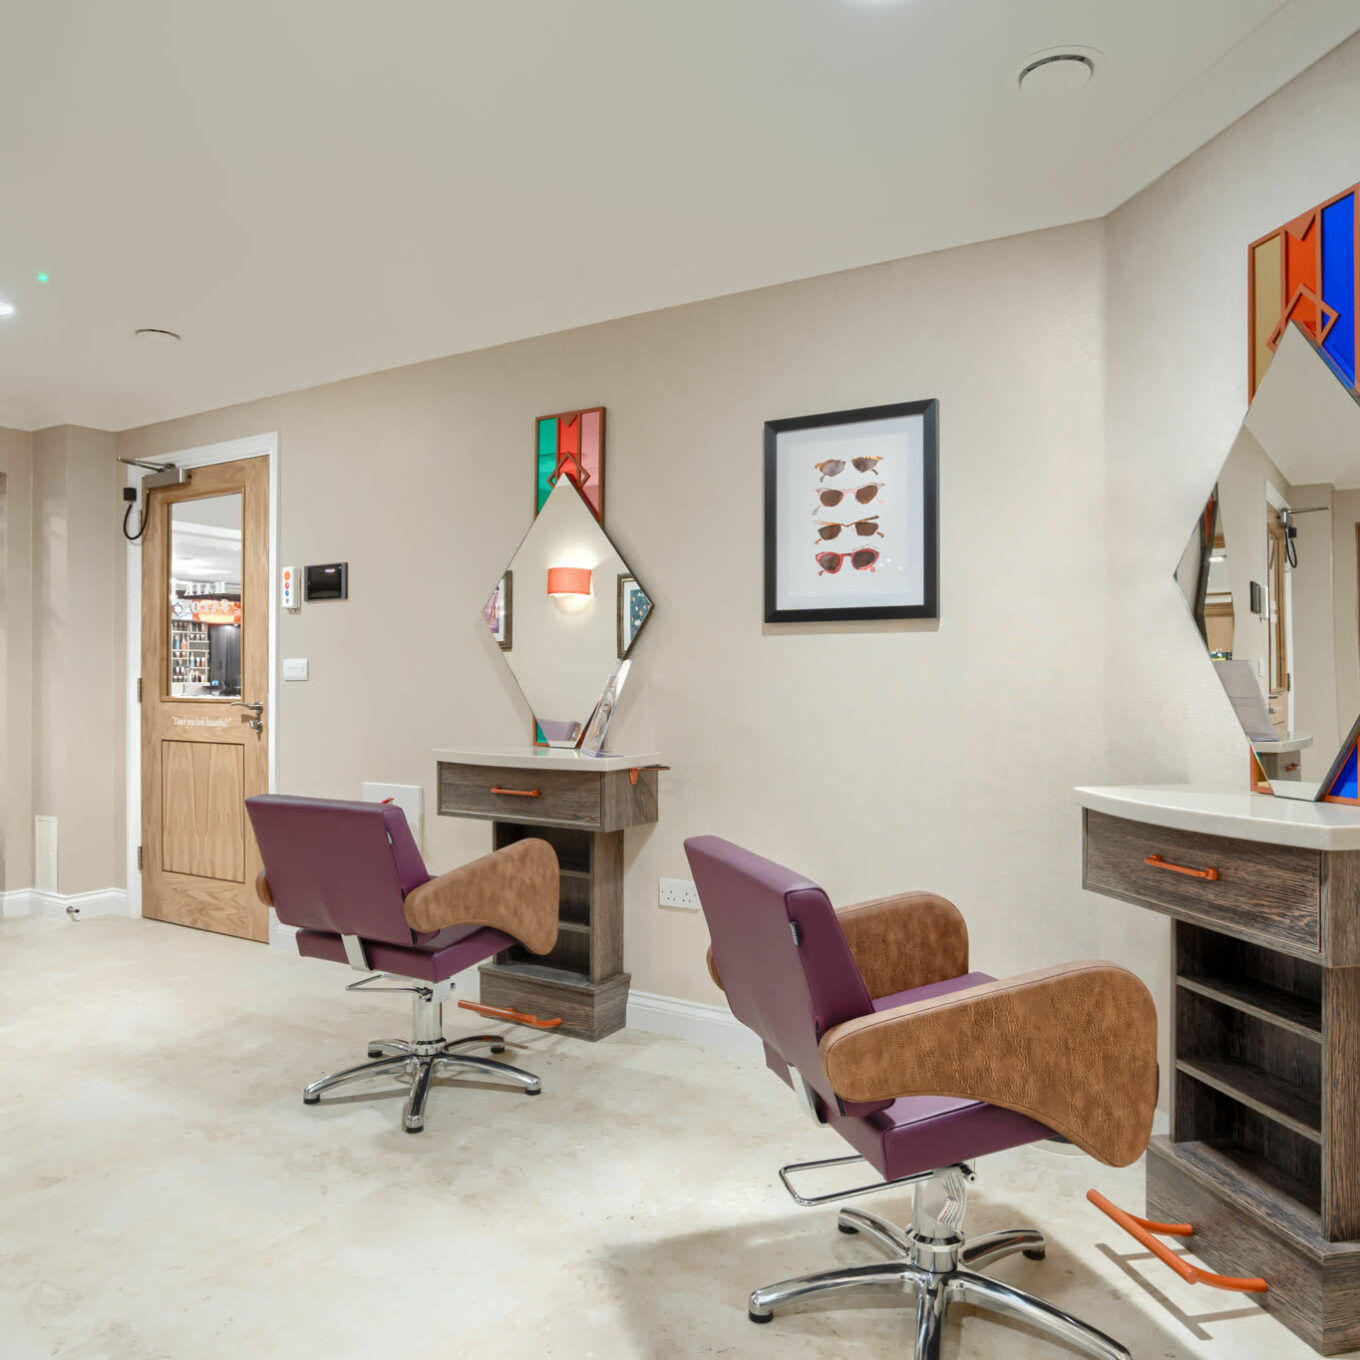 Hair and Beauty salon at Elsyng House Care Home in Enfield